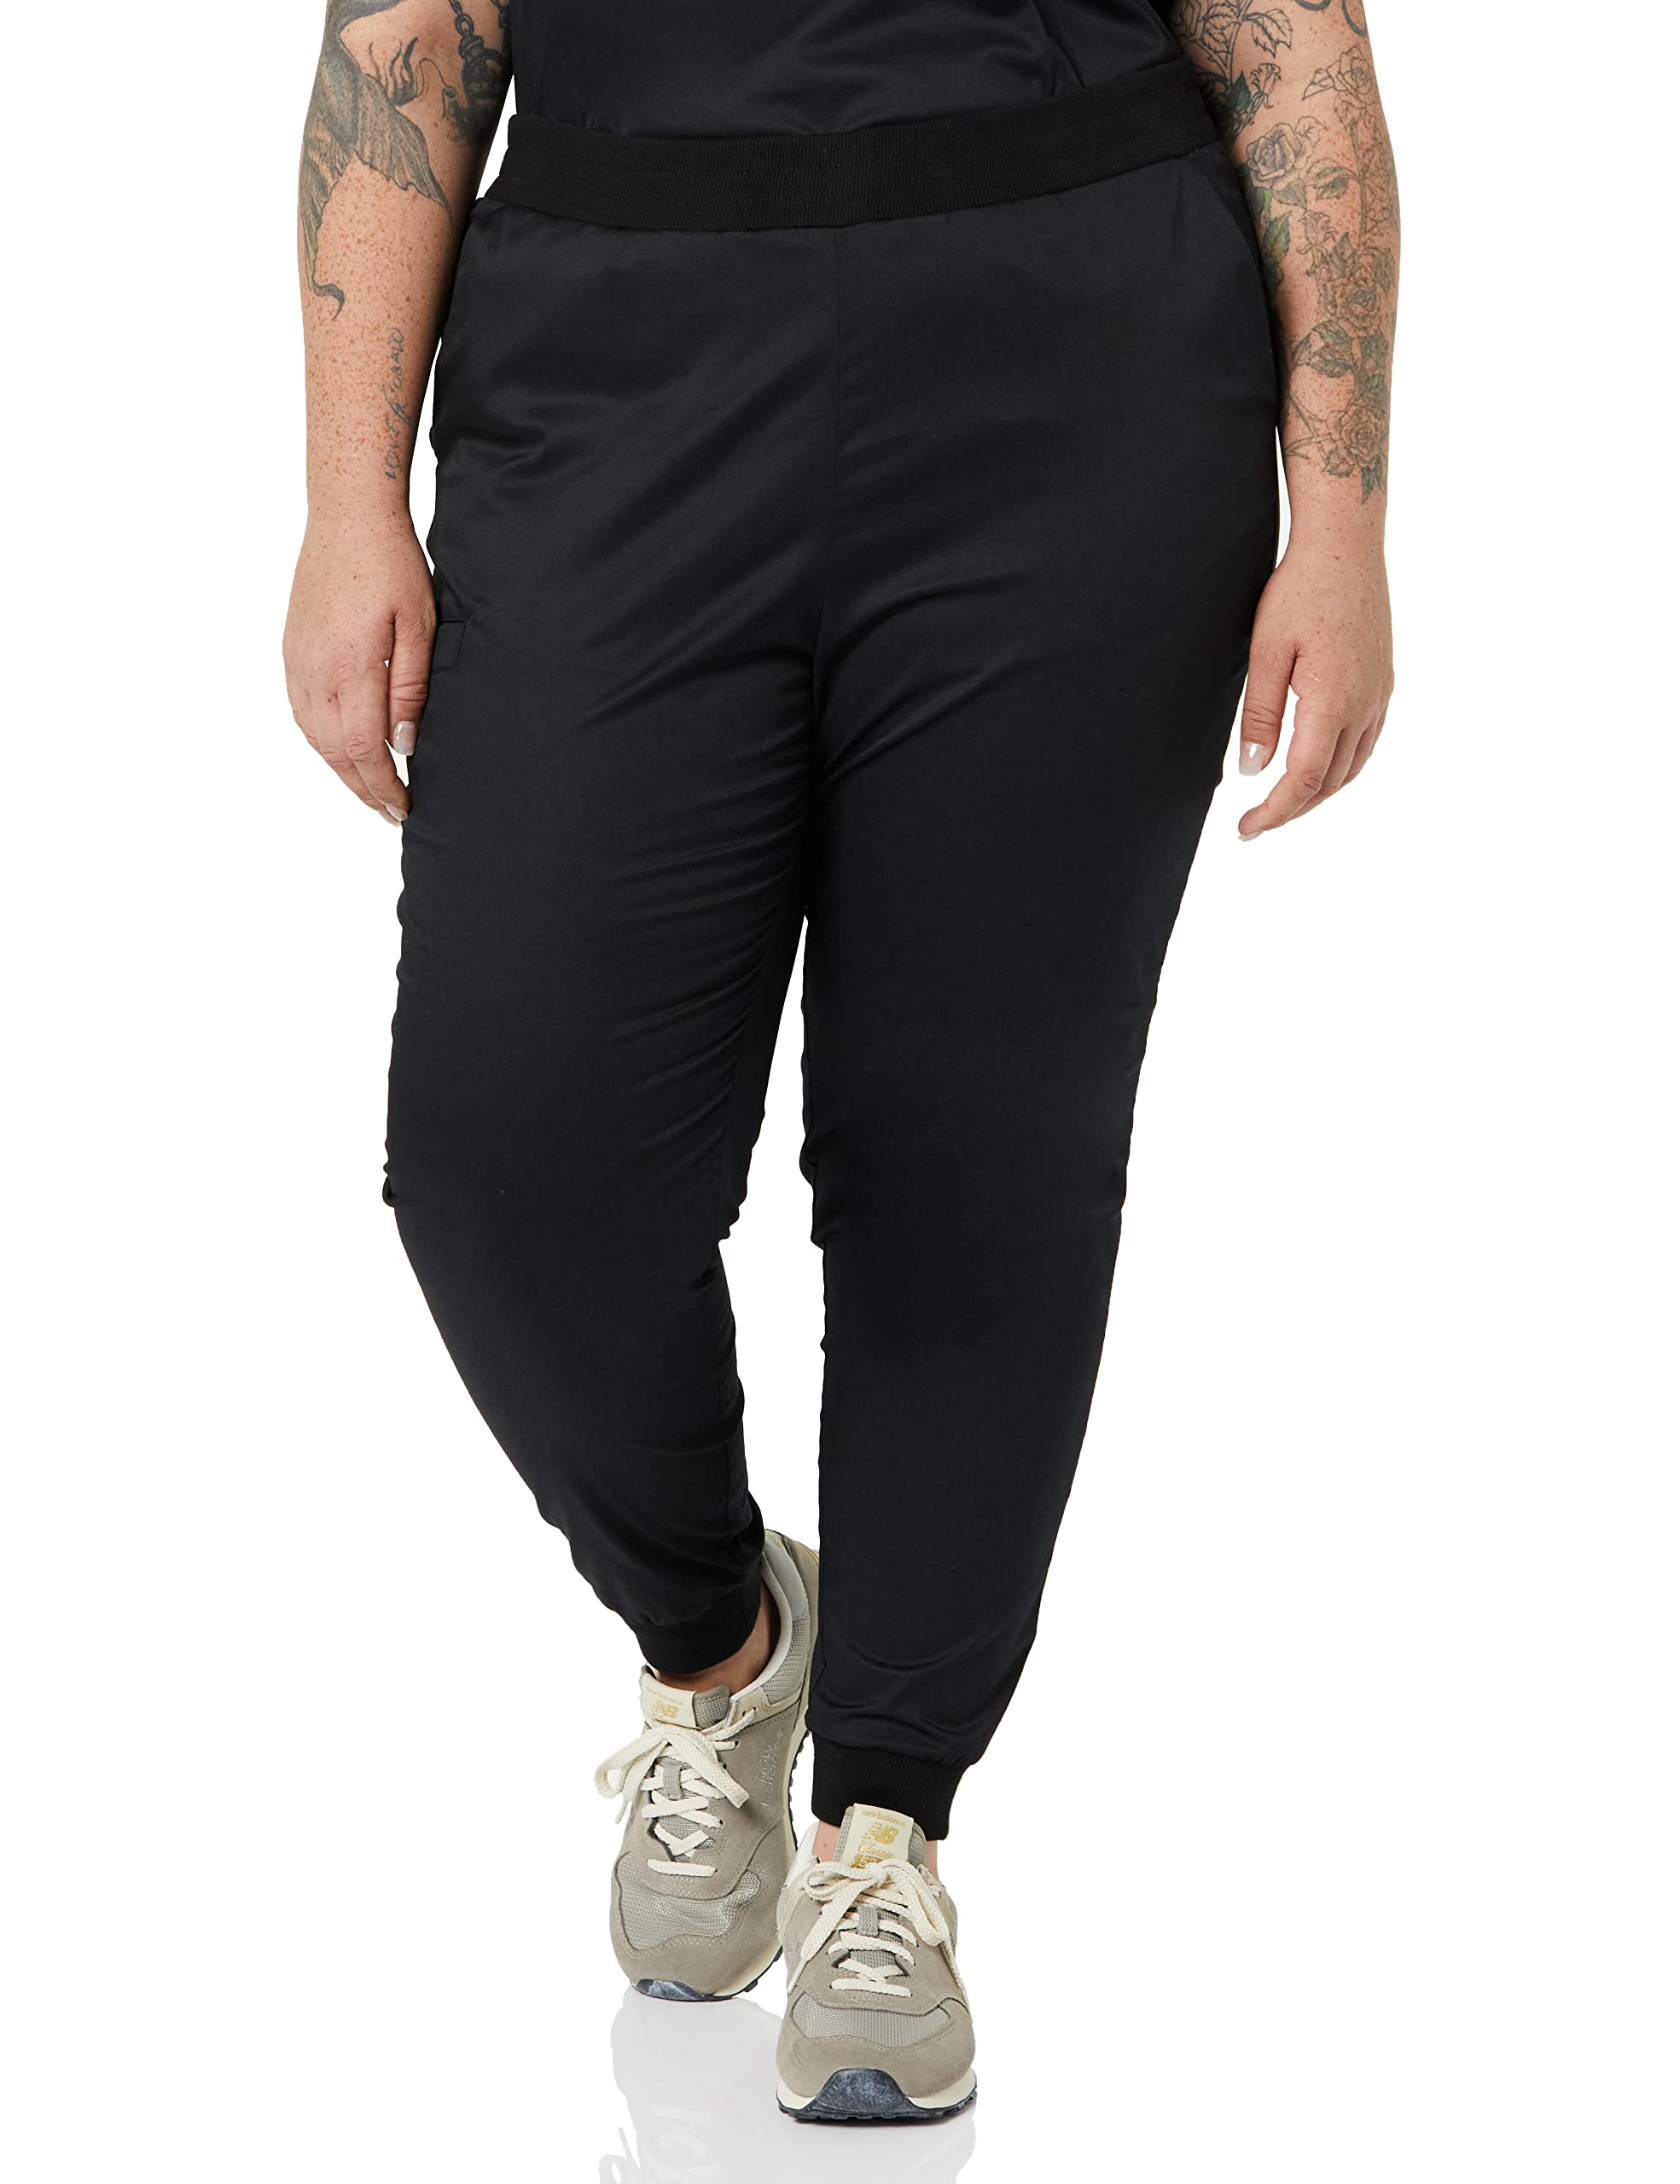 Amazon Essentials Women's Slim Fit Jogger Scrub Pant (Available in Plus Size)